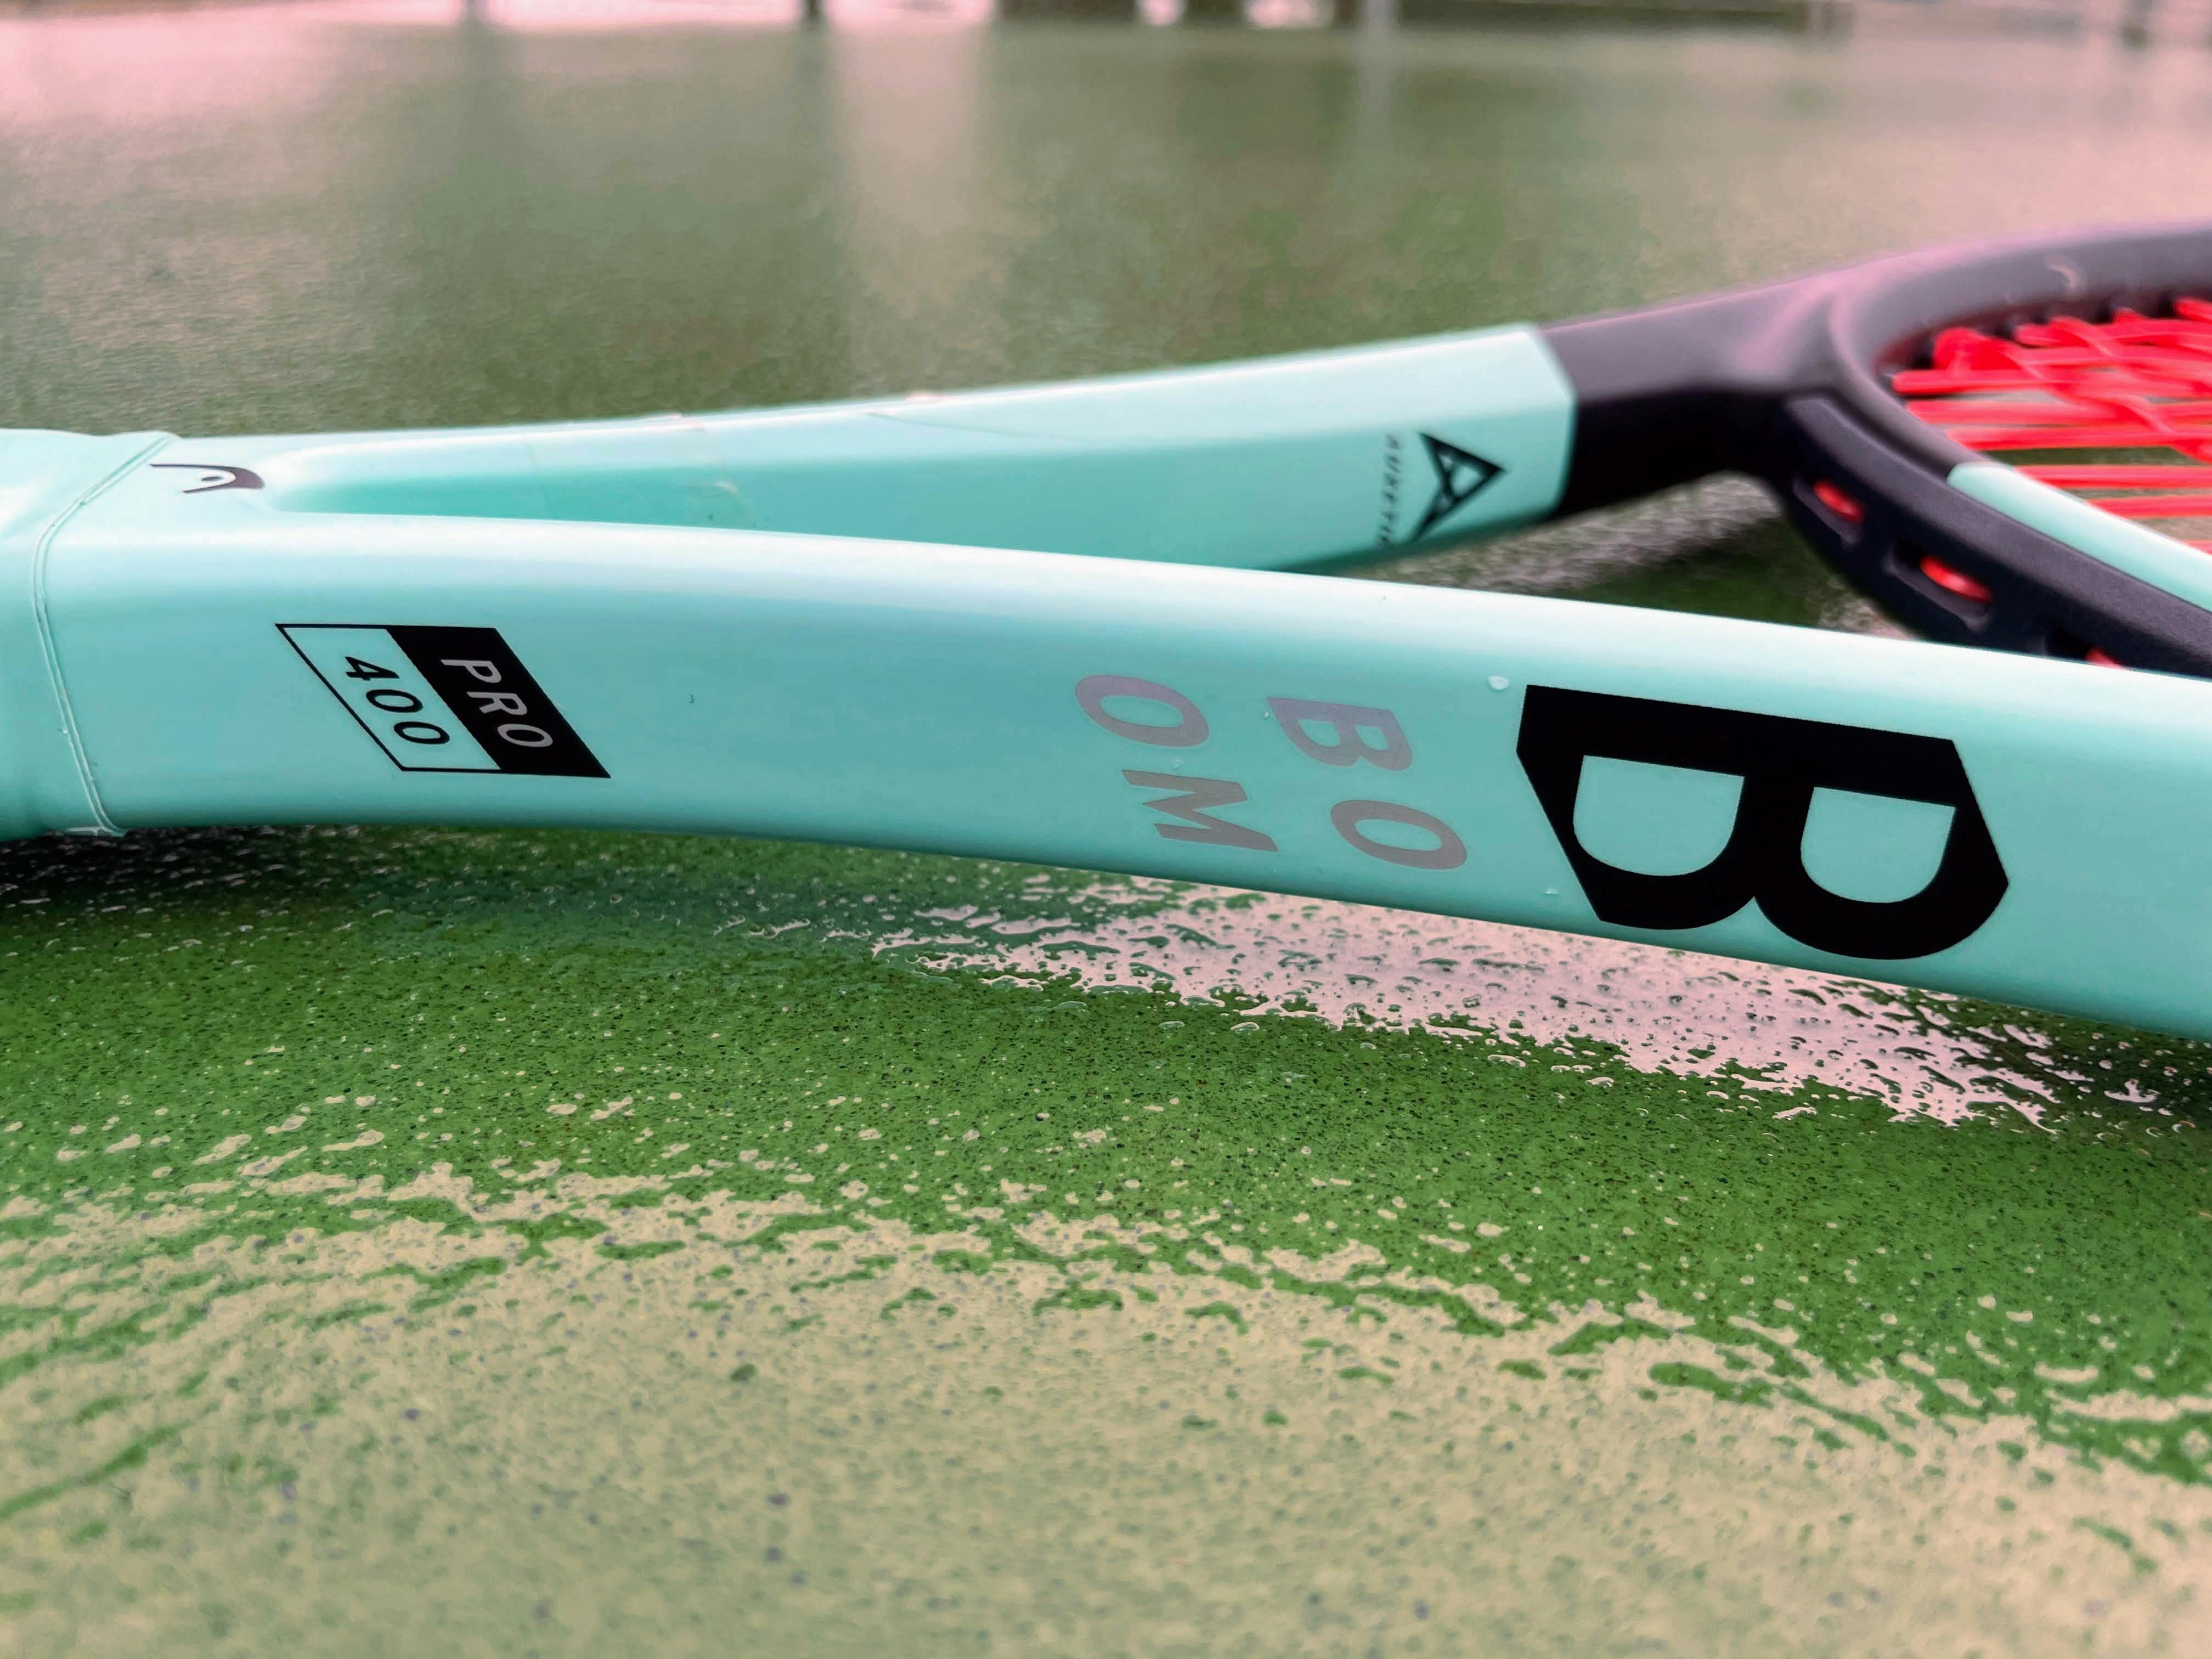 The details on the Head Boom Pro Racquet.